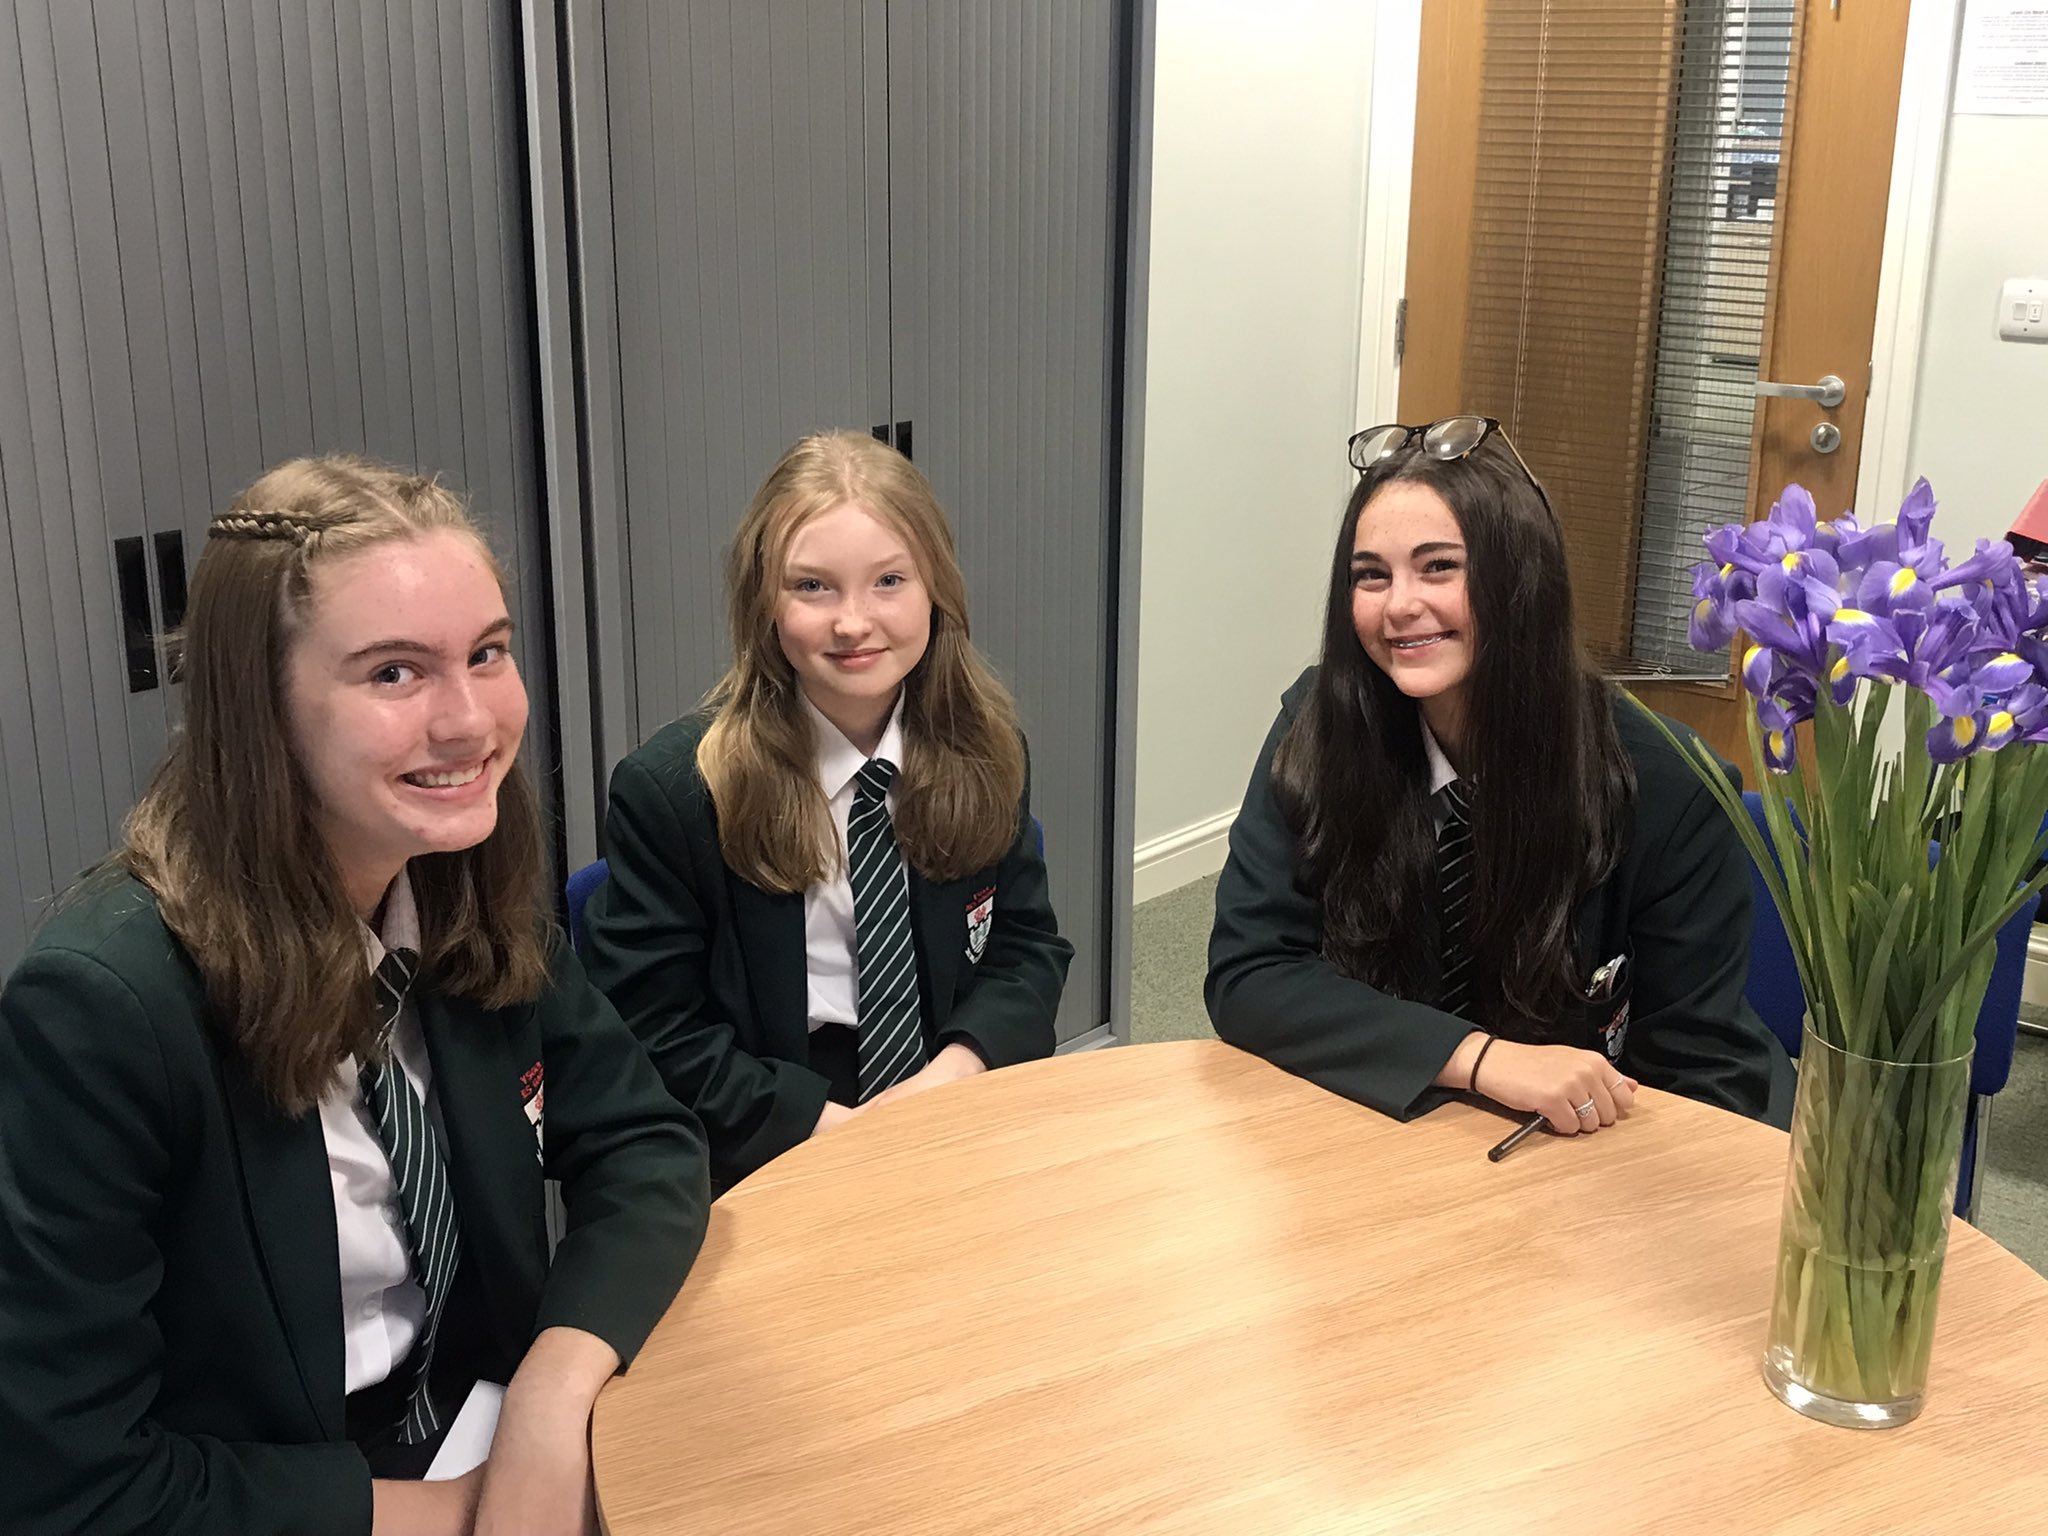 Nia Jones, Mabli Hampson and Mari Williams, Year 10 students at Ysgol Maes Garmon, who put together some special messages for the schools 60th anniversary.